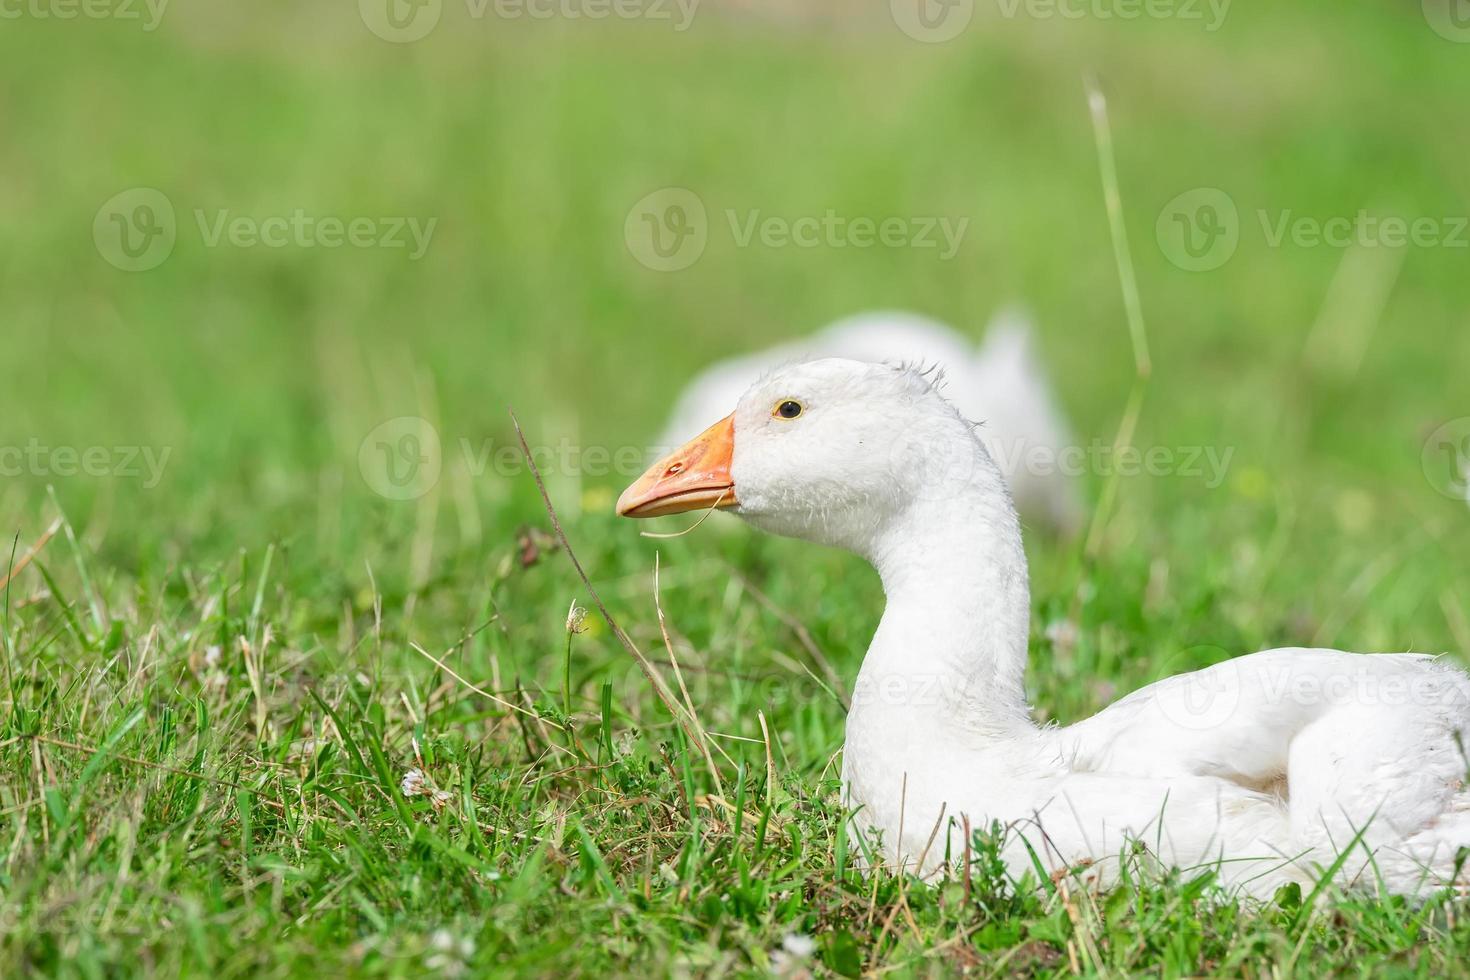 side view of white goose standing on green grass. photo